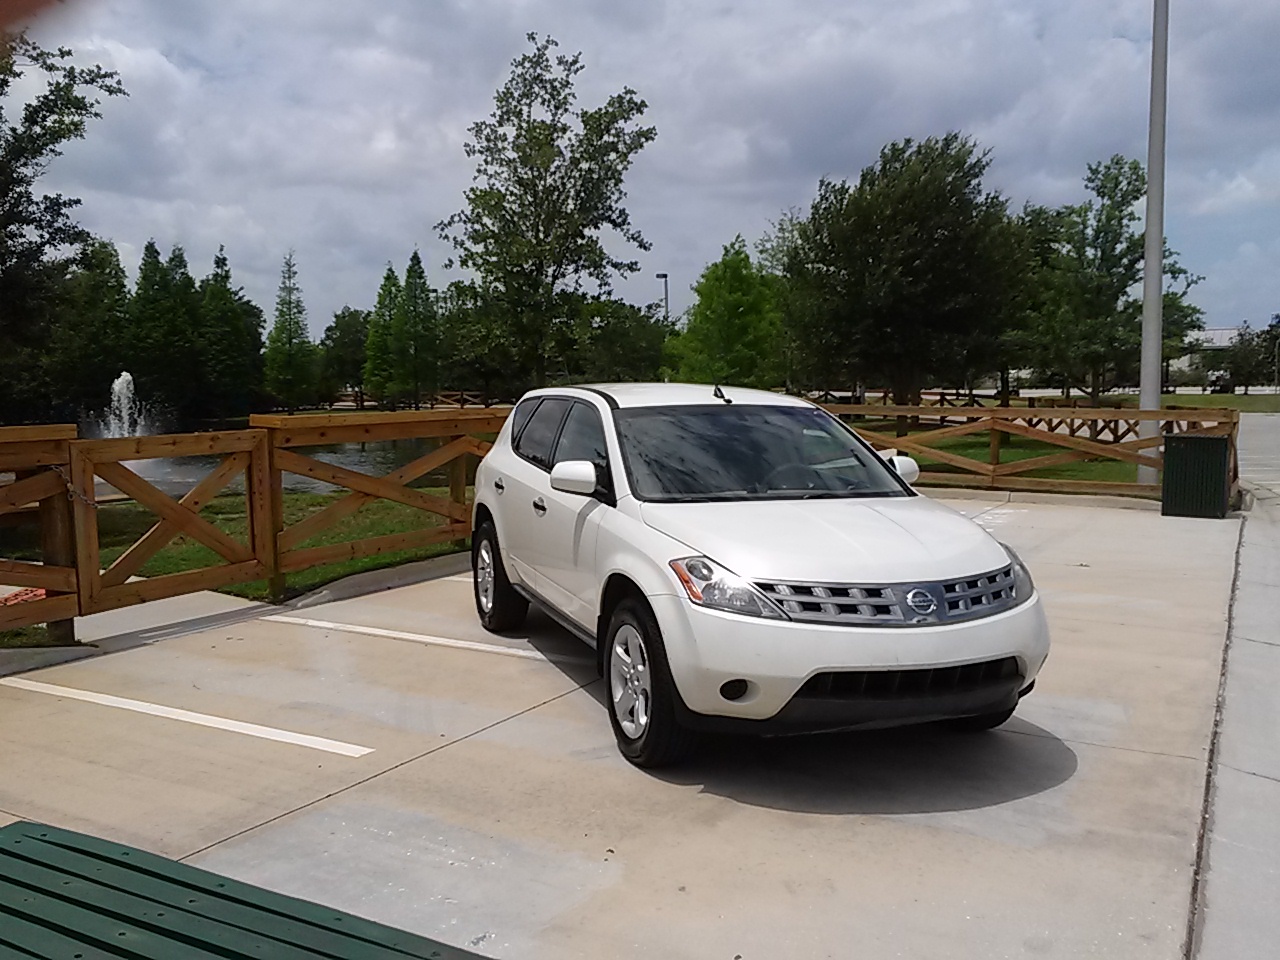 2005 Nissan murano video review #3